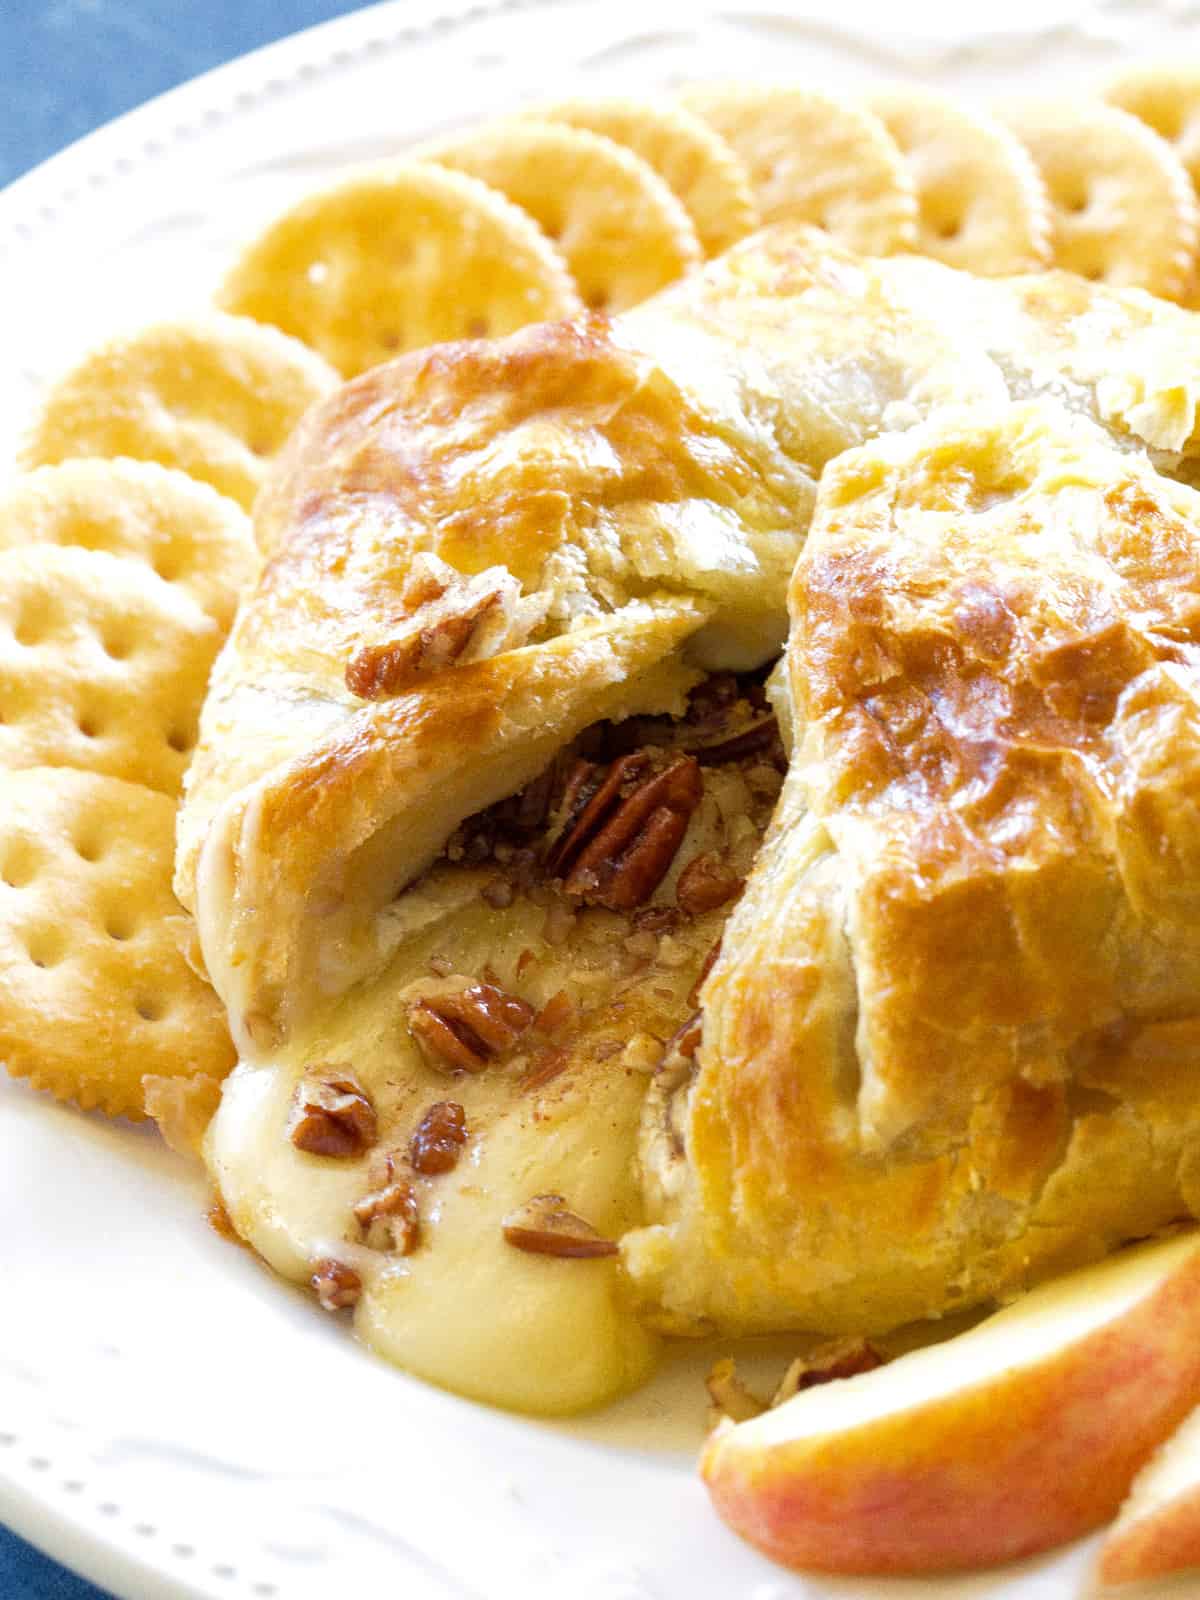 Baked Brie In Puff Pastry (Brie en croute with jam) - Amira's Pantry